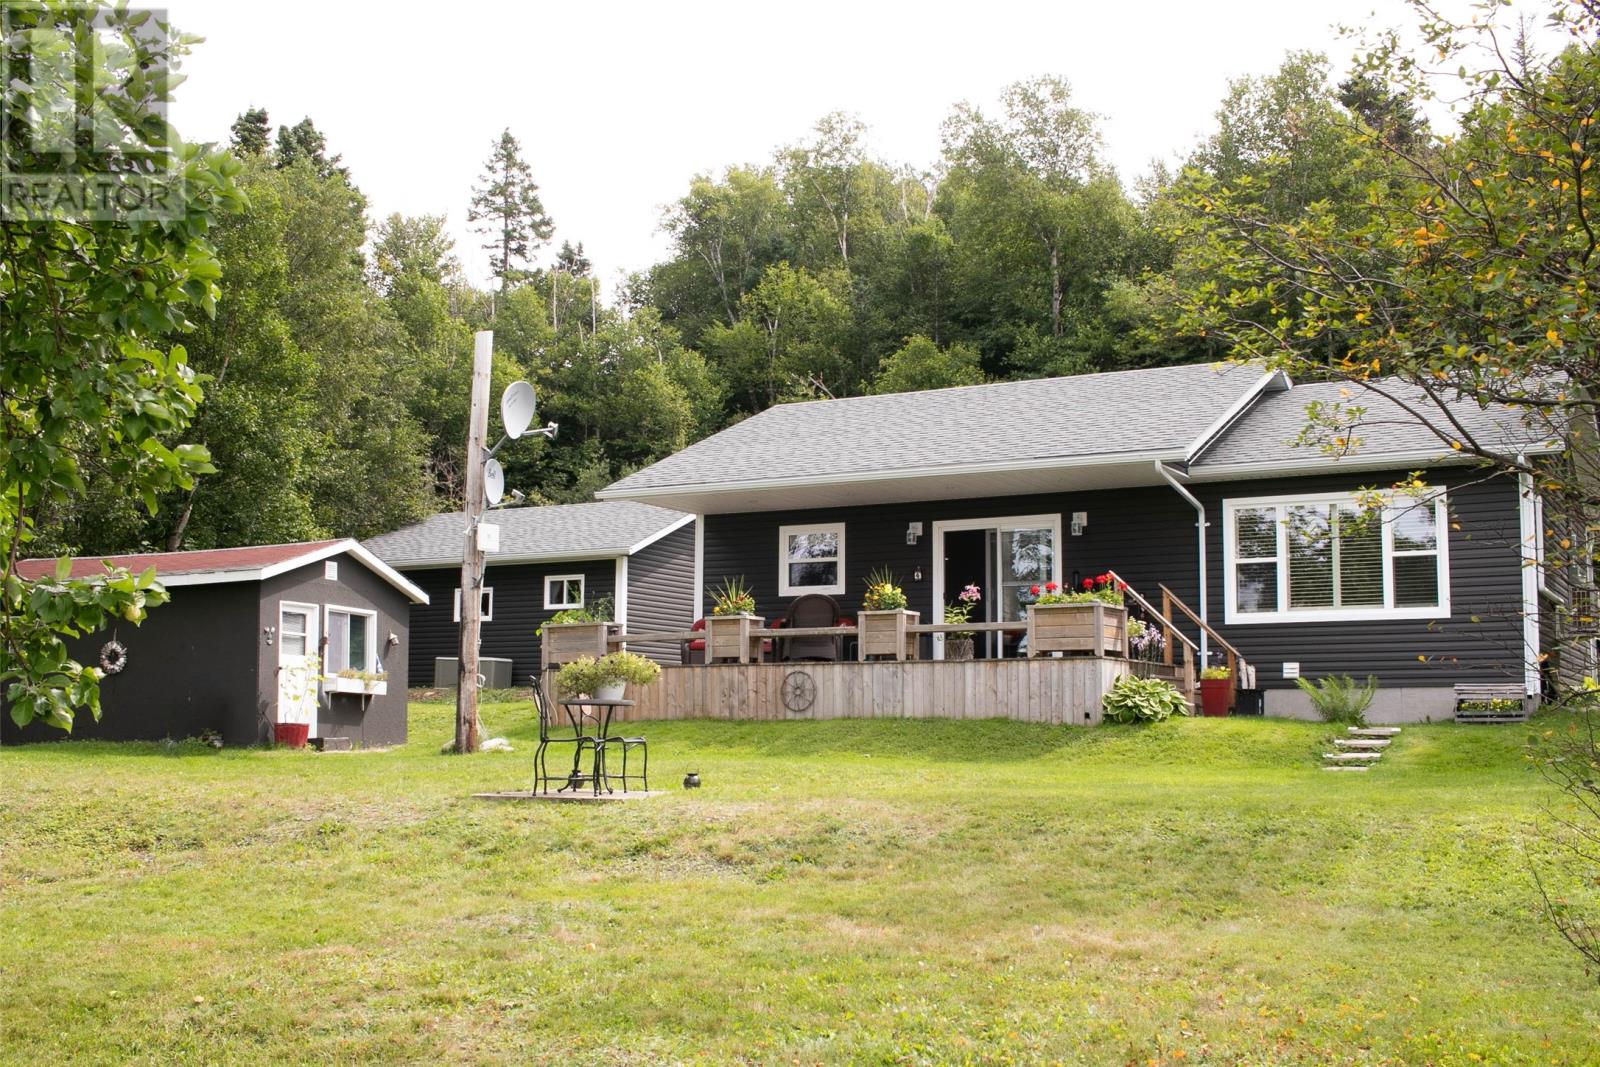 4 Aspen Valley Lane located in Glovertown South, Newfoundland and Labrador